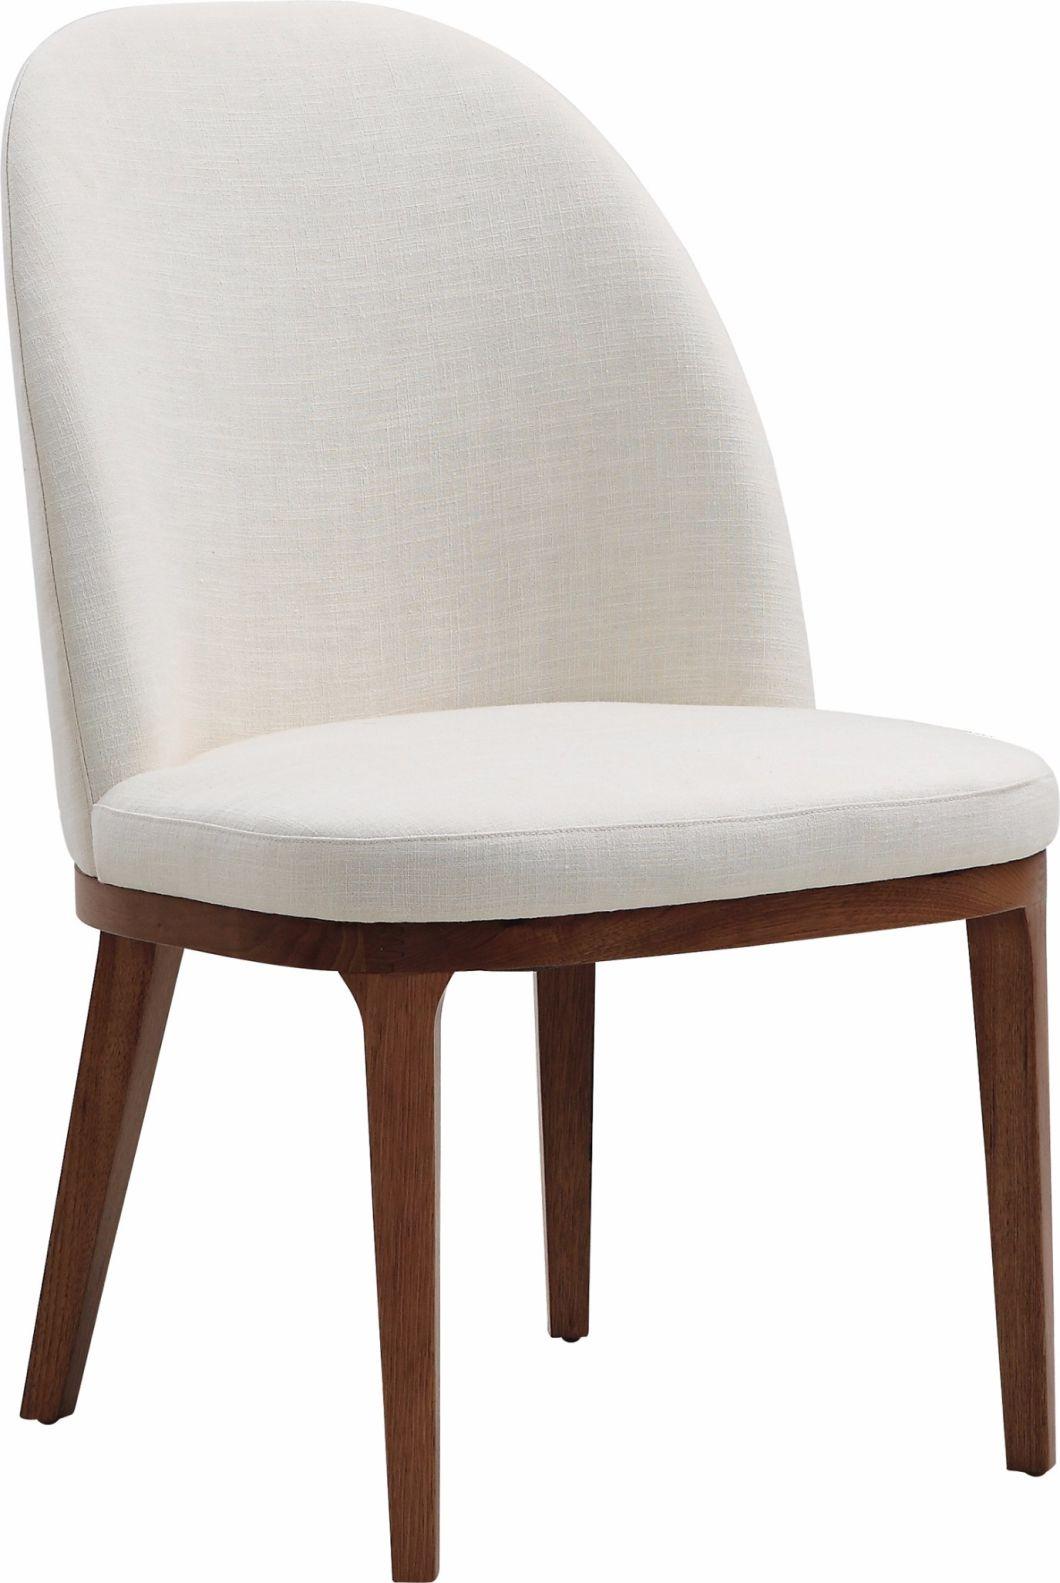 Italy Design Contemporary Dining Chair